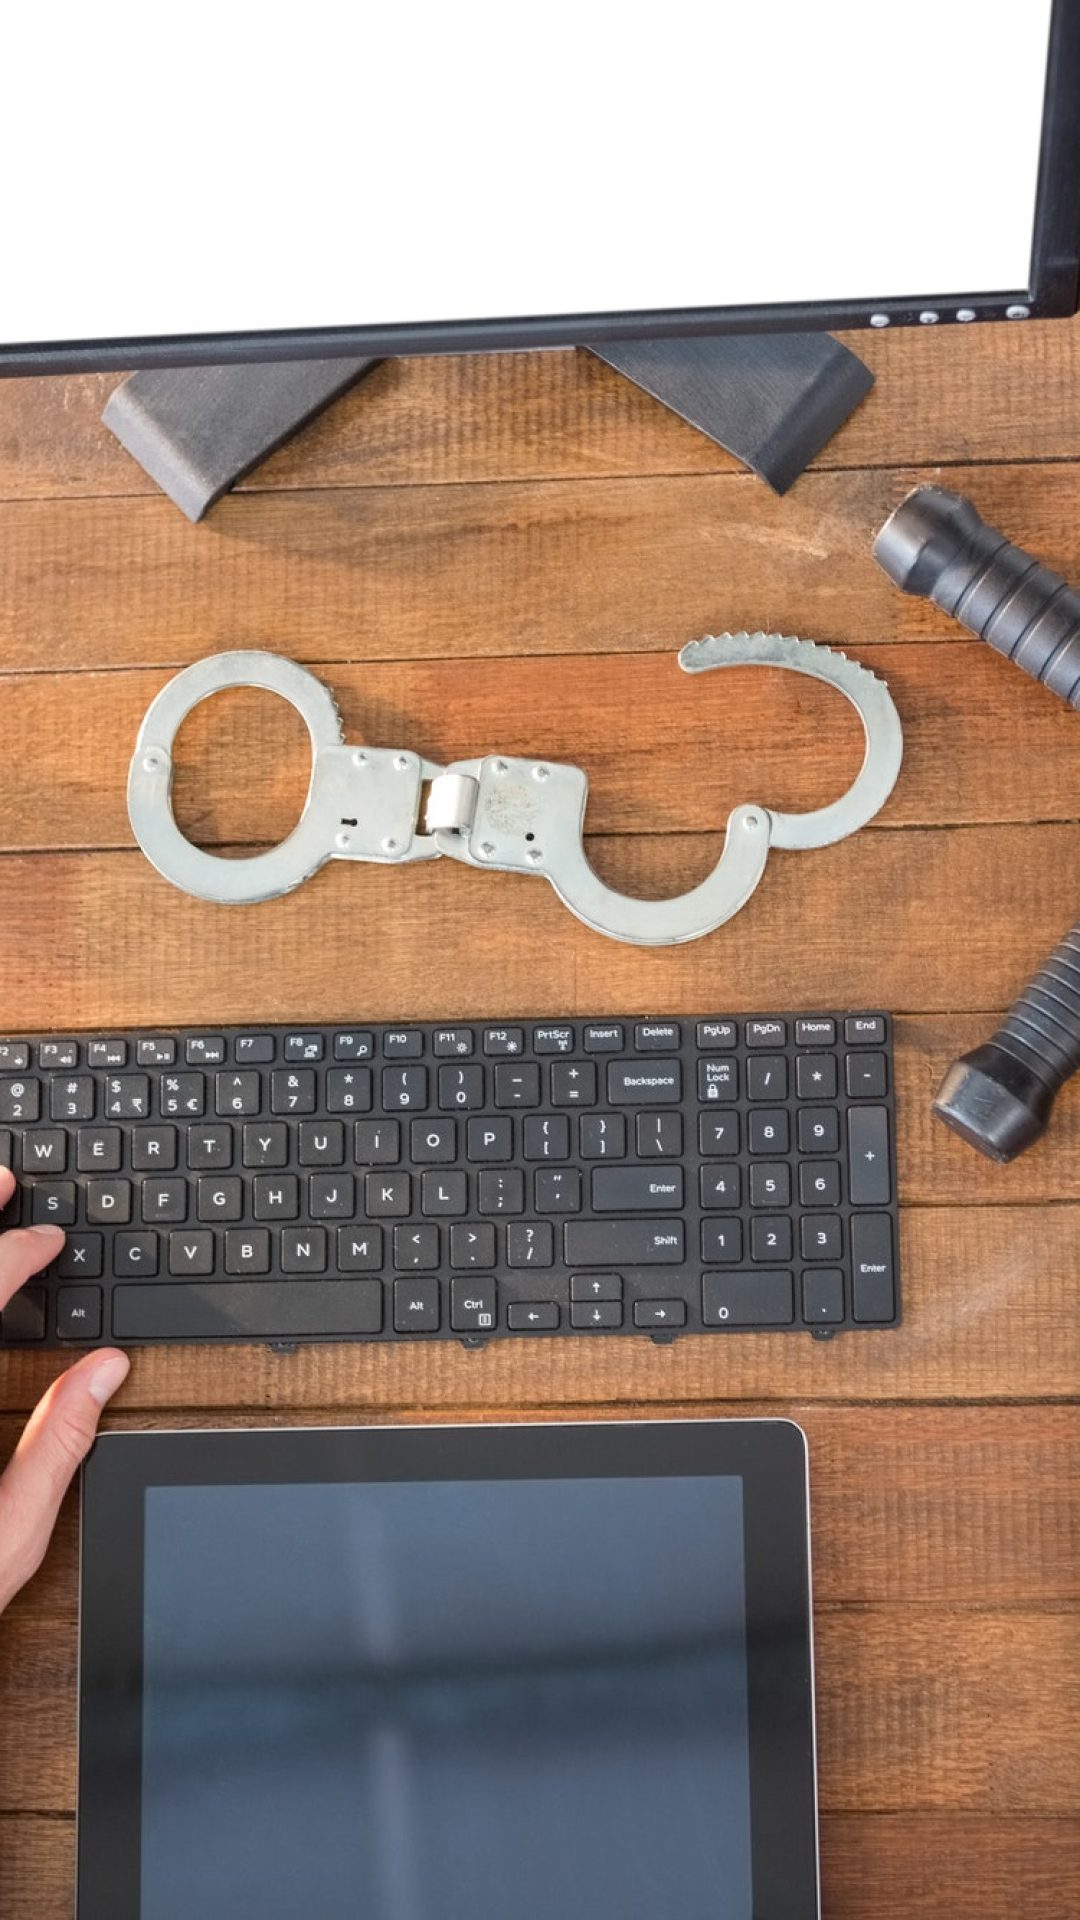 hands-of-security-officer-using-computer.jpg